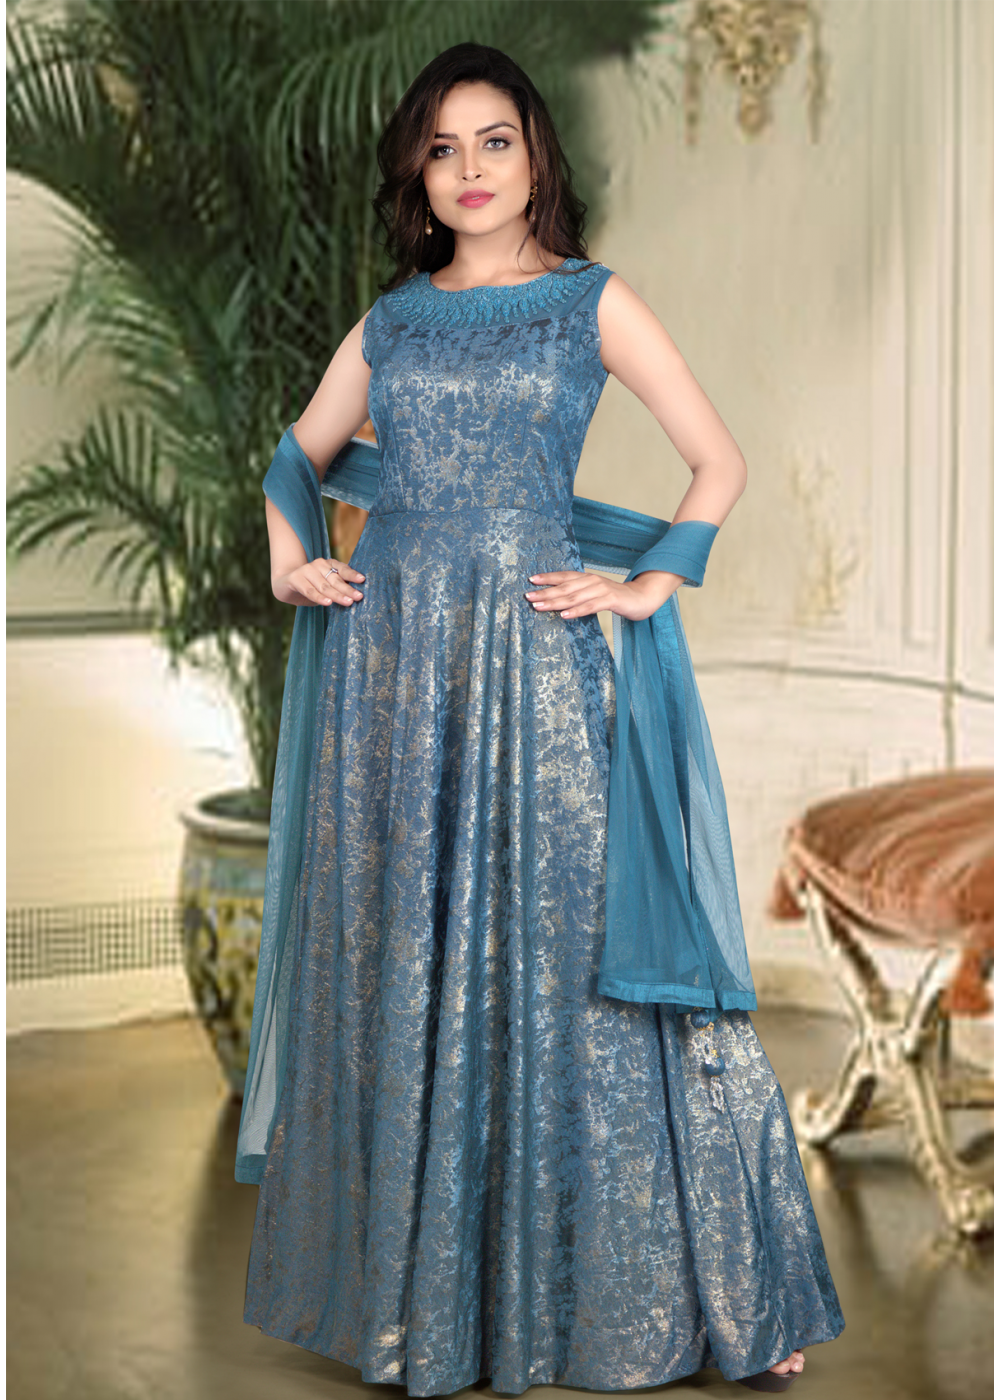 Beautiful Silk Gown with Hand Embroidery embellishments. | Designer  anarkali dresses, Anarkali dress pattern, Party wear indian dresses